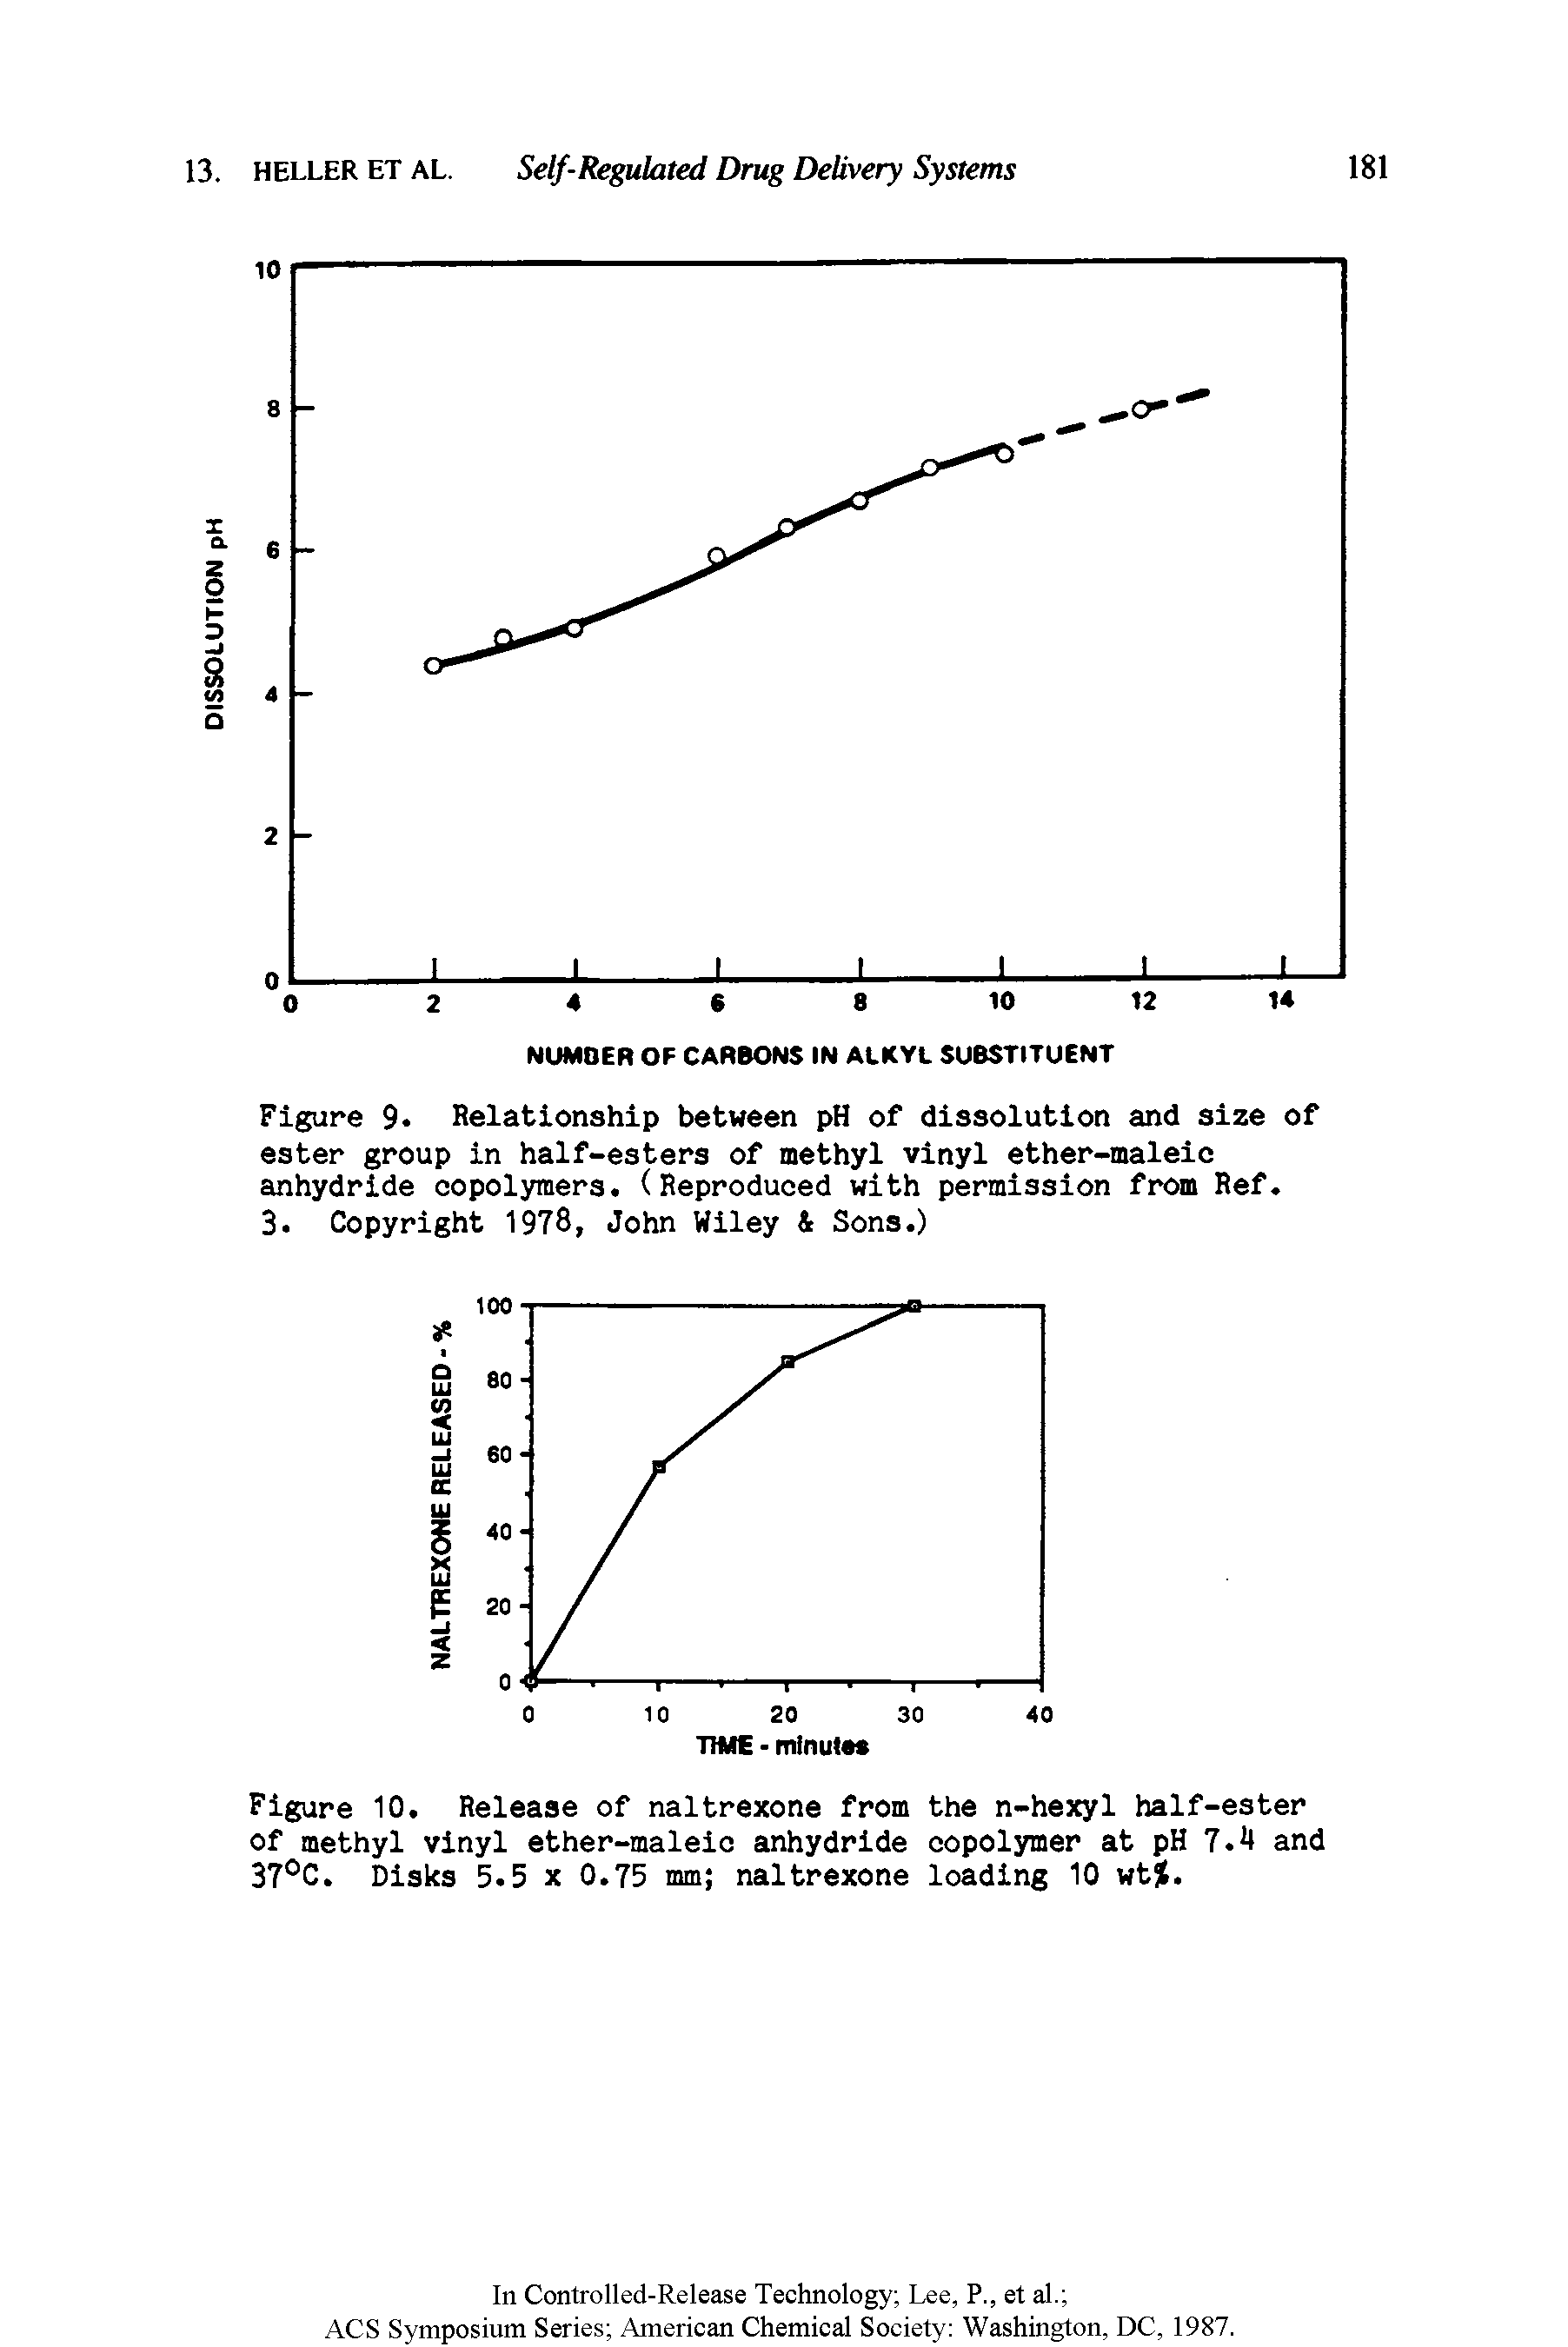 Figure 9 Relationship between pH of dissolution and size of ester group in half-esters of methyl vinyl ether-maleic anhydride copolymers. (Reproduced with permission from Ref.